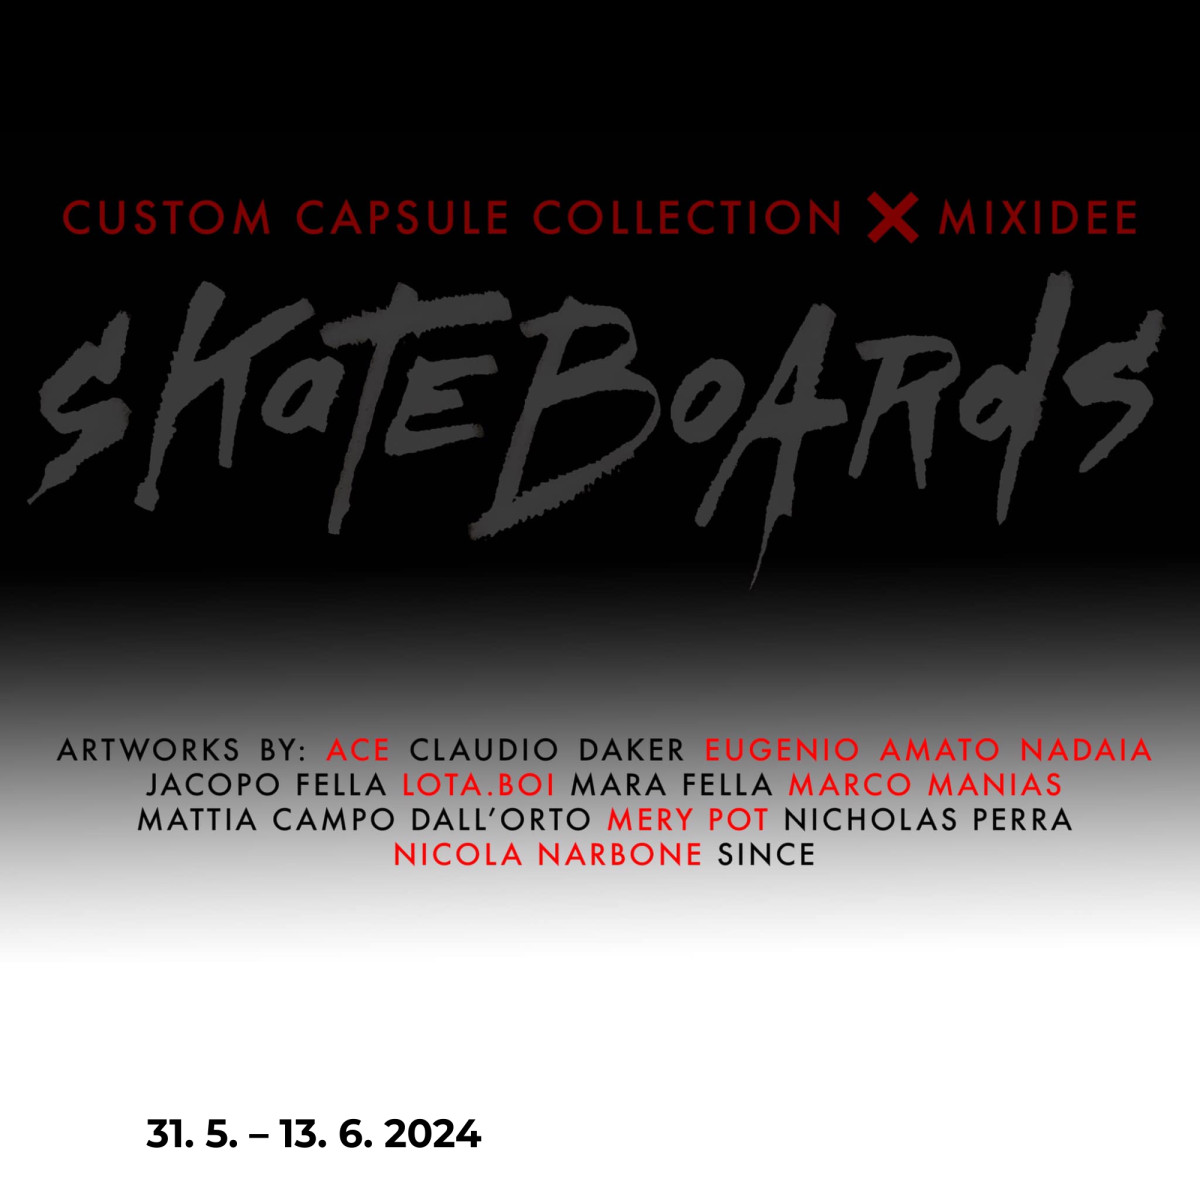 Costum capsule collection X Mixidee: Skateboards